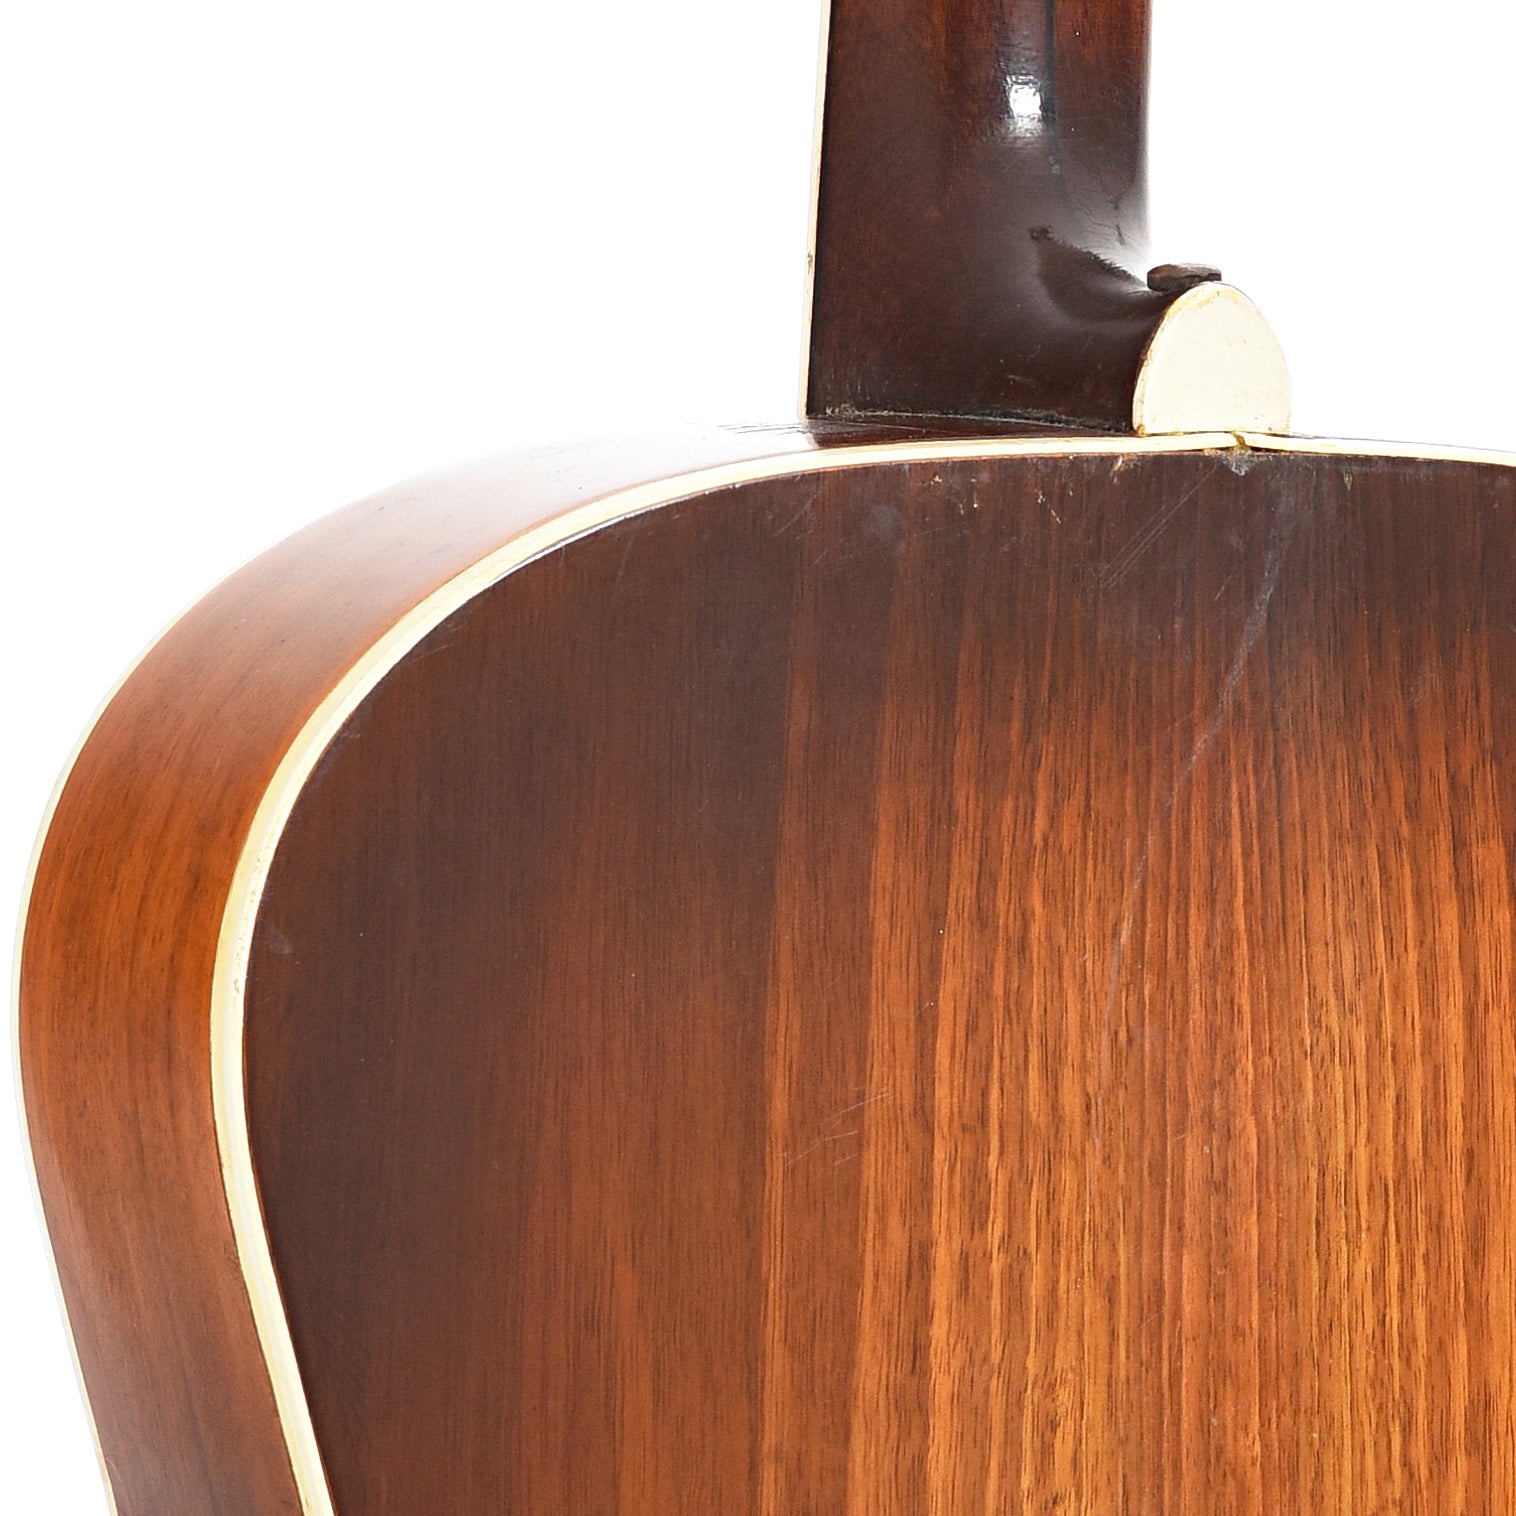 Neck joint of Levin Garanti Archtop Acoustic Guitar (1950)